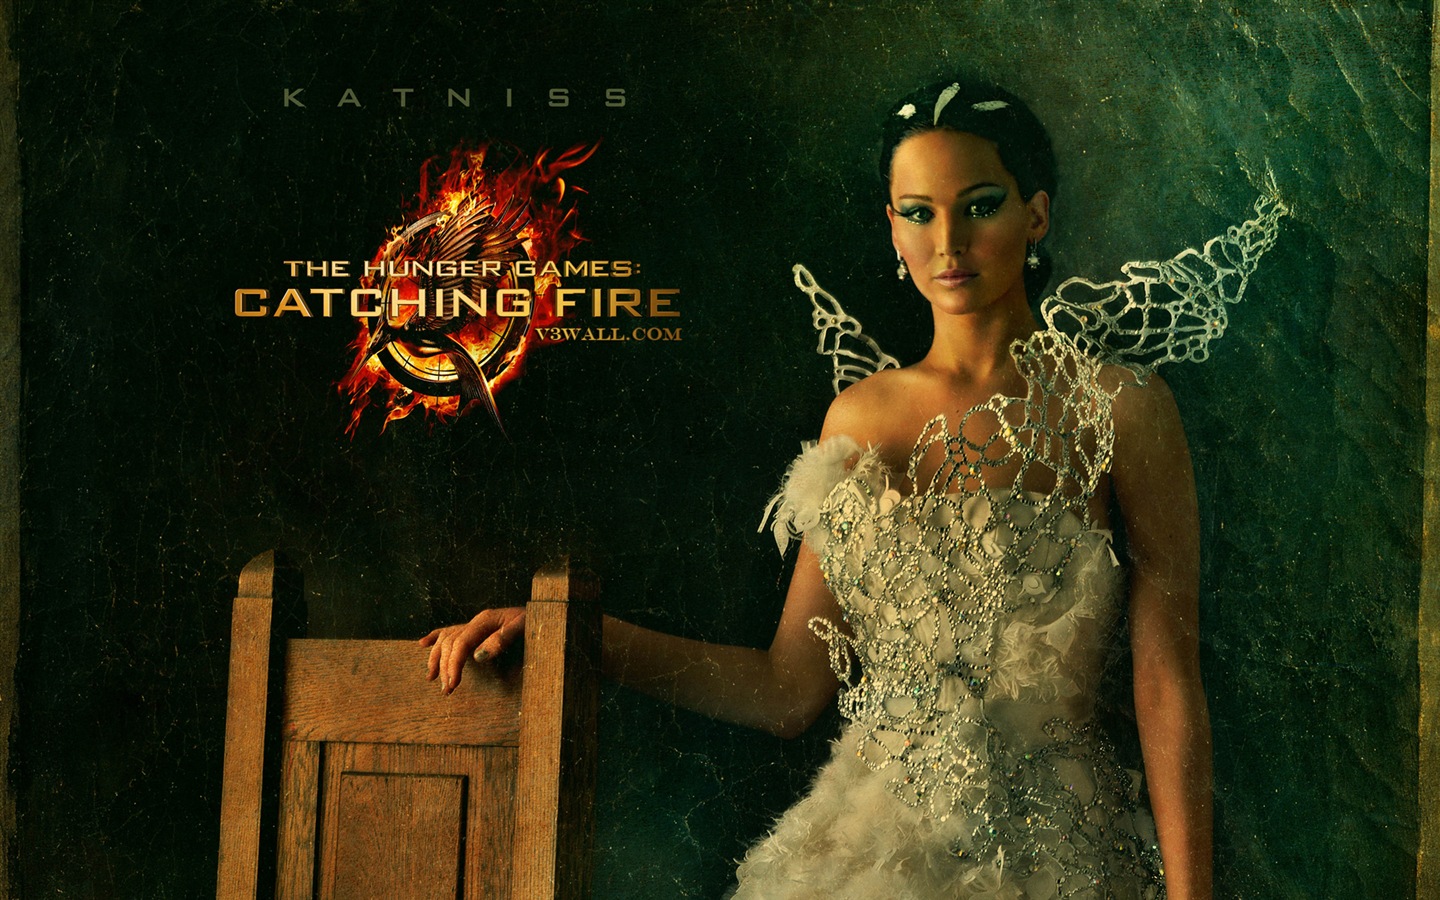 The Hunger Games: Catching Fire HD tapety #13 - 1440x900